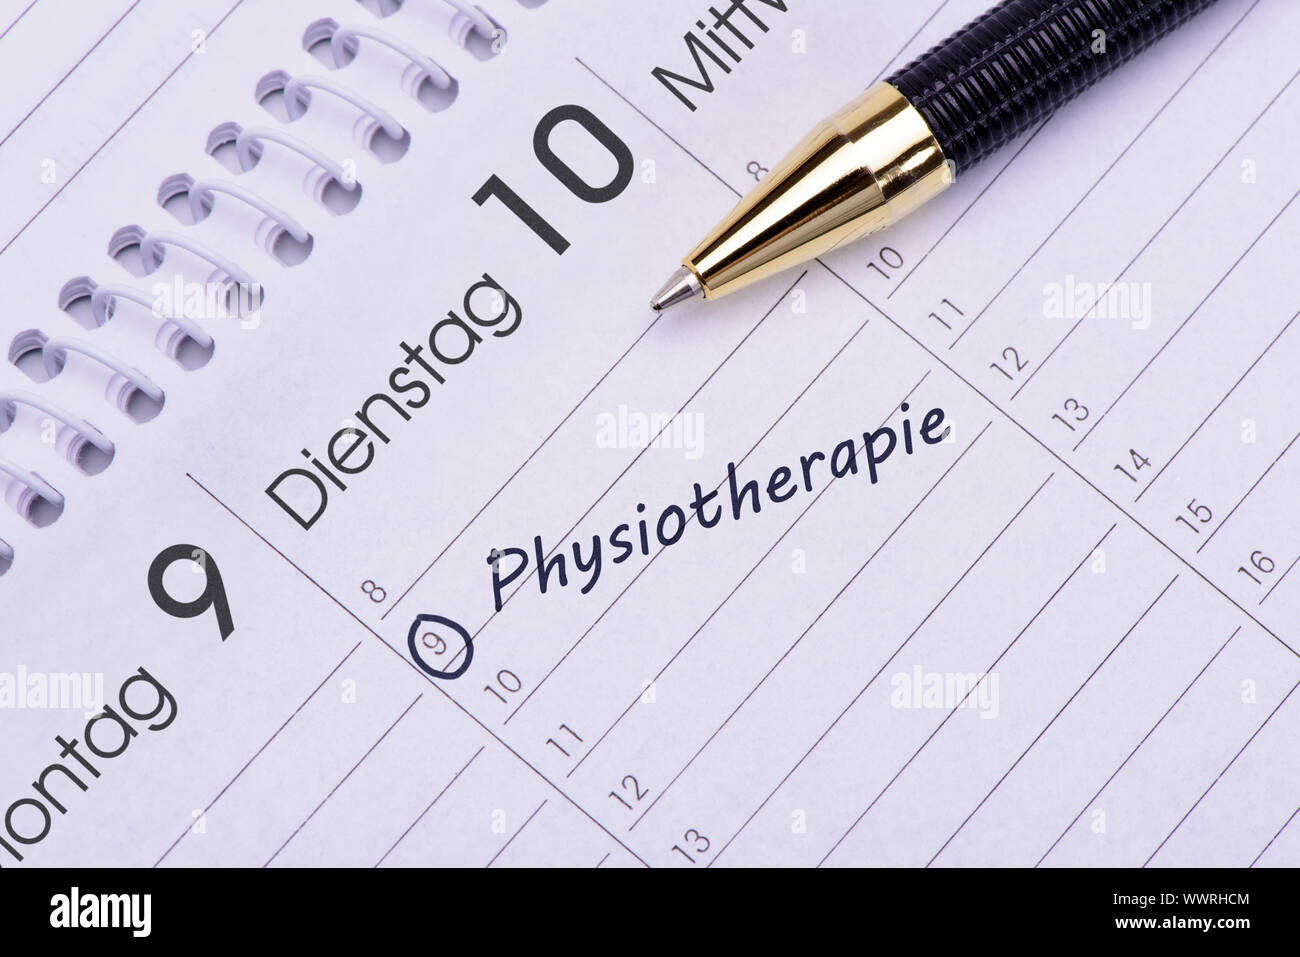 Physiotherapy appointment in calendar Stock Photo